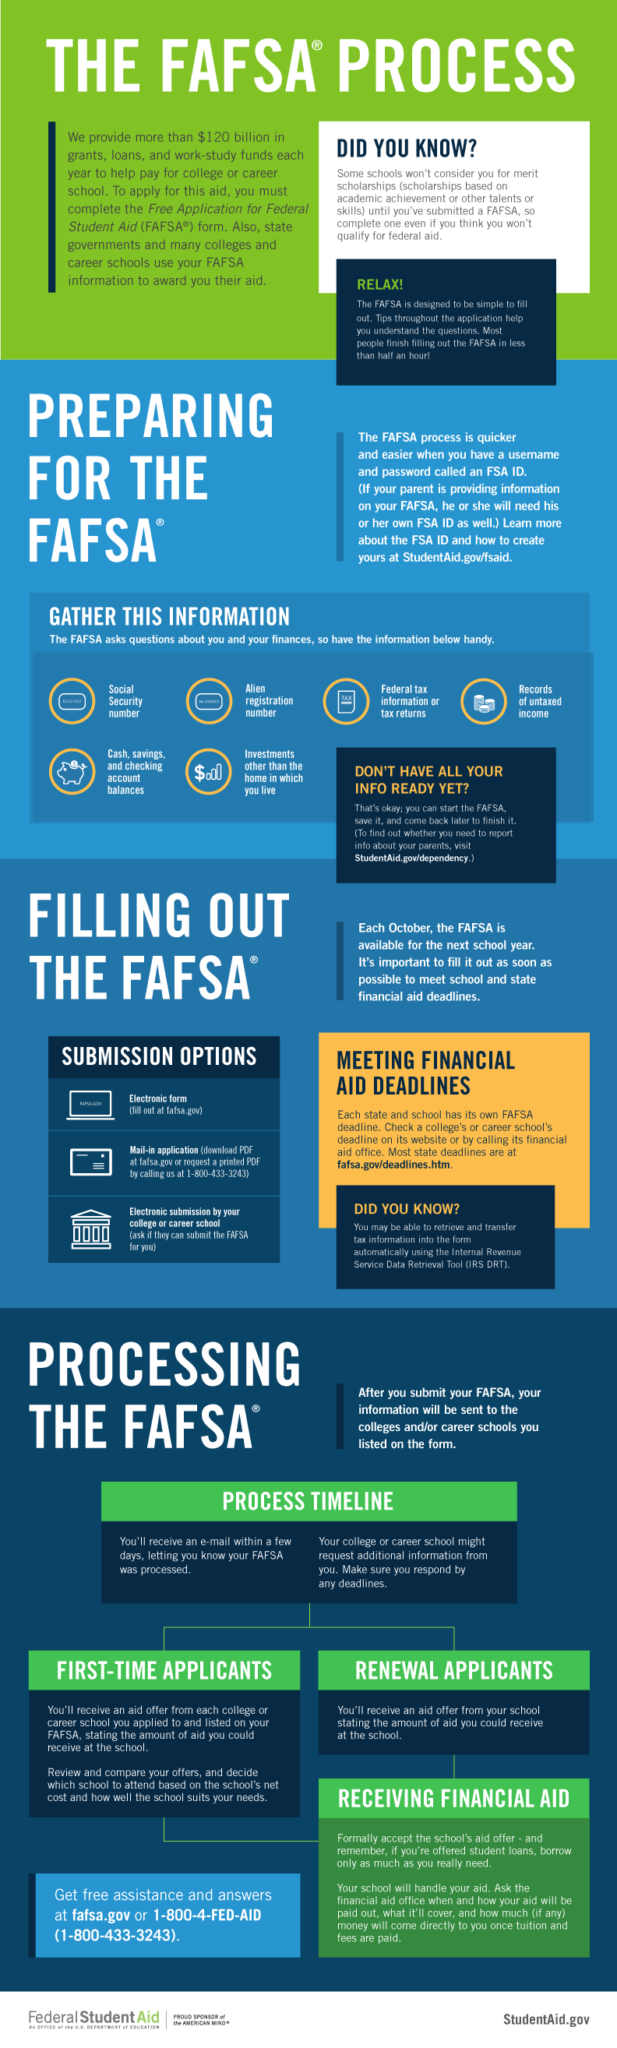 Don't Fear the FAFSA Renew your 20232024 Application Texas